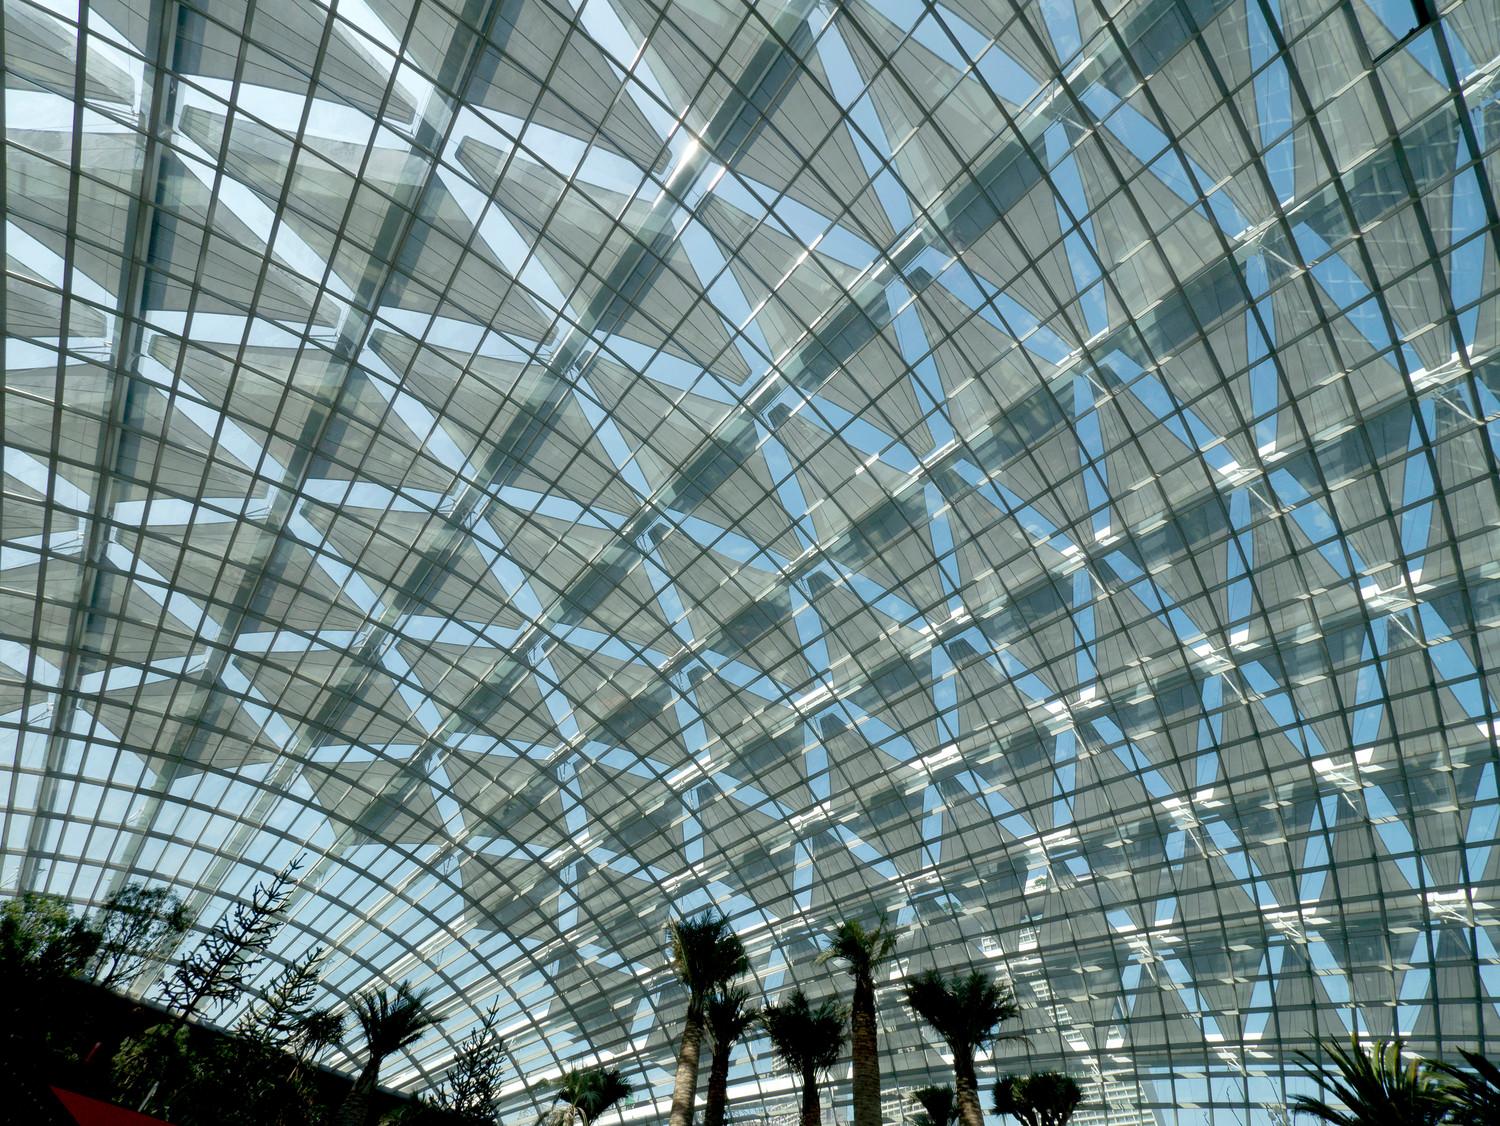 Cooled Conservatories, Gardens by the Bay - Deployed shading